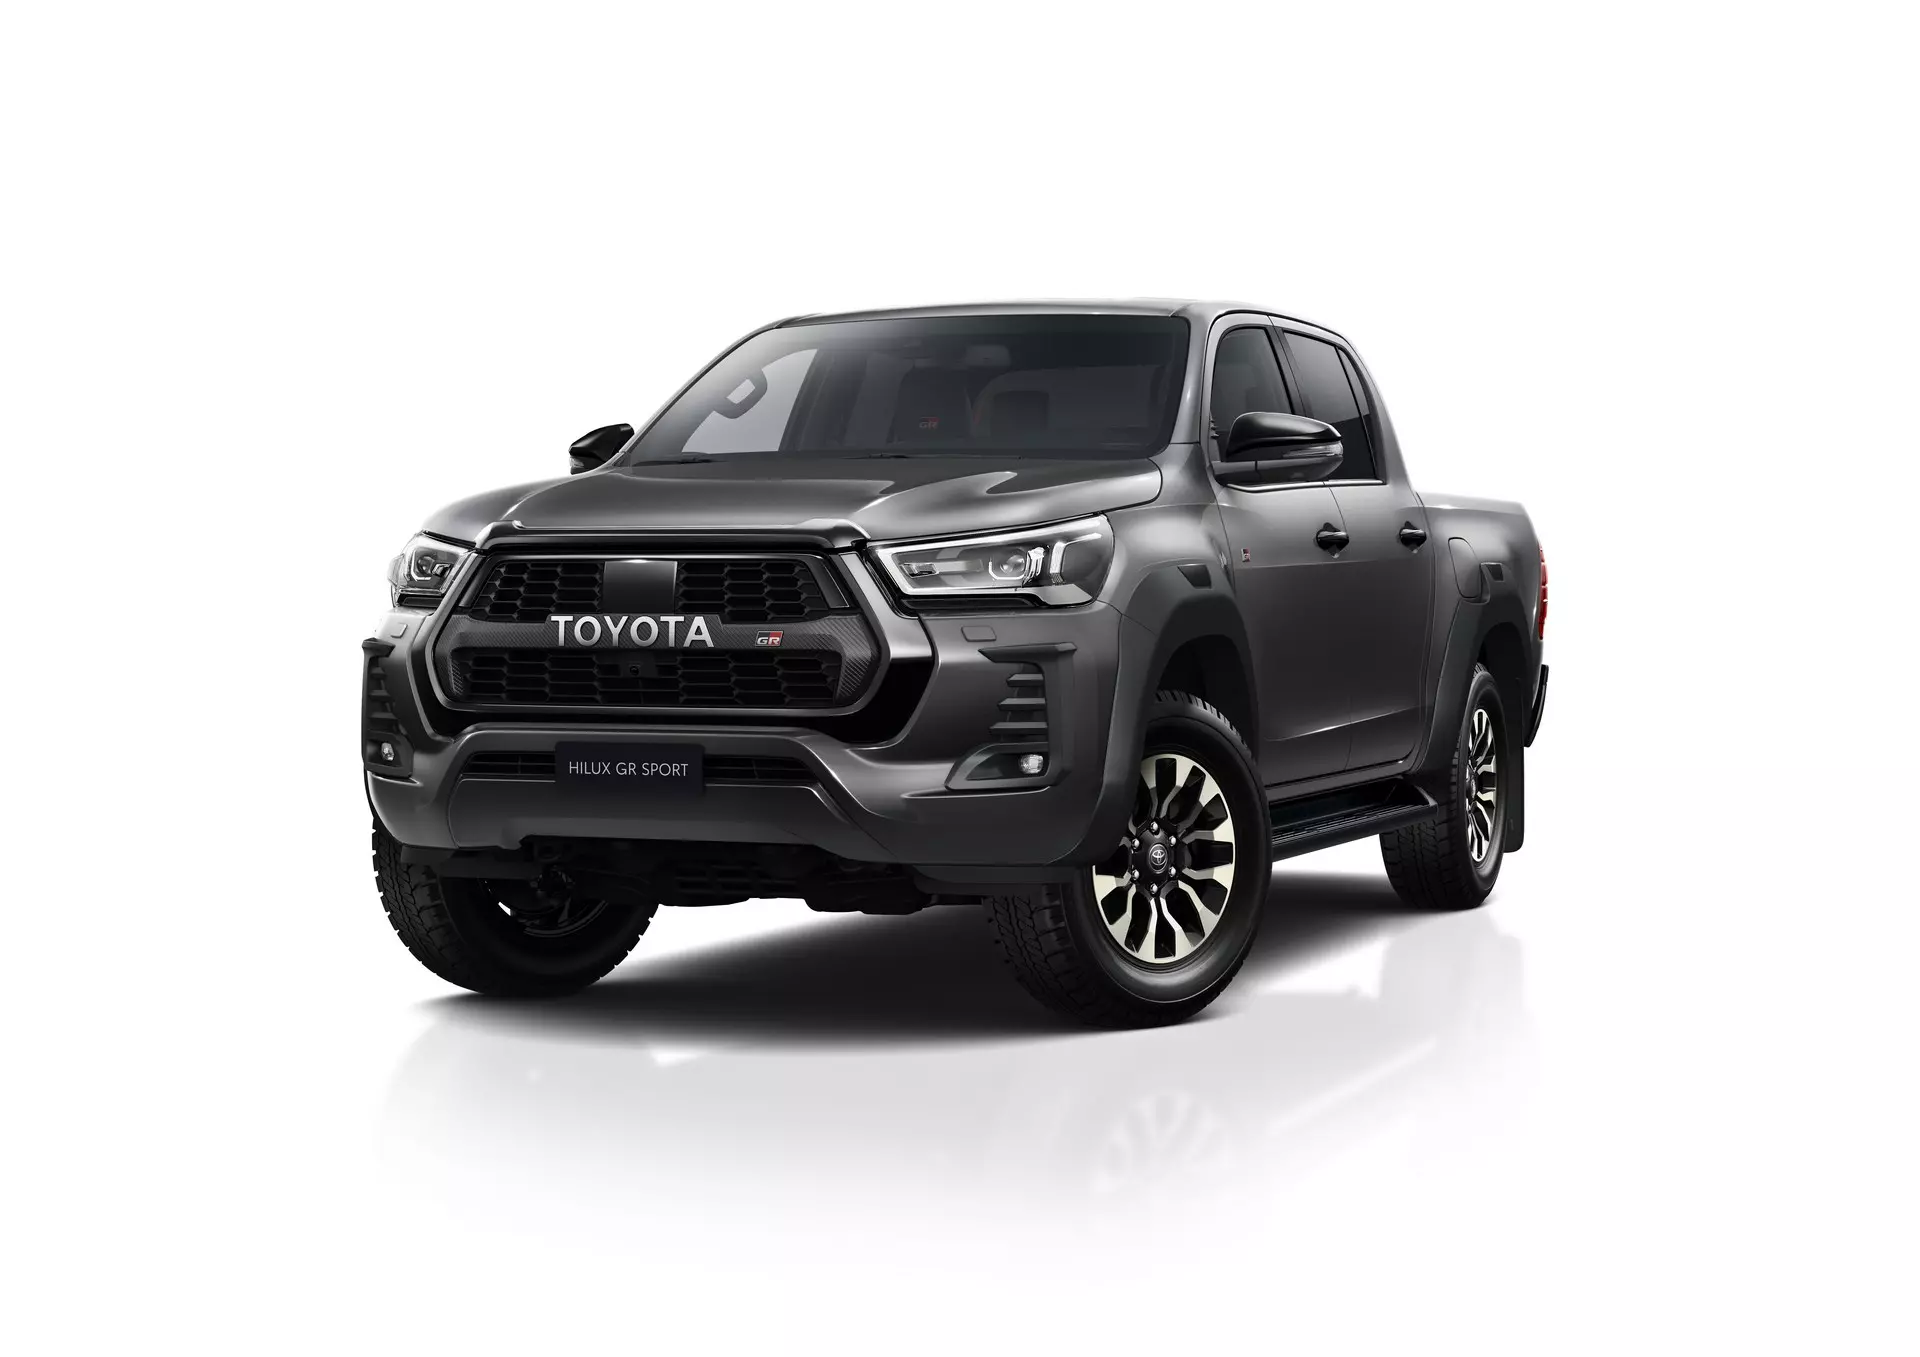 2022 Toyota Hilux GR Sport: Specifications, price, release date